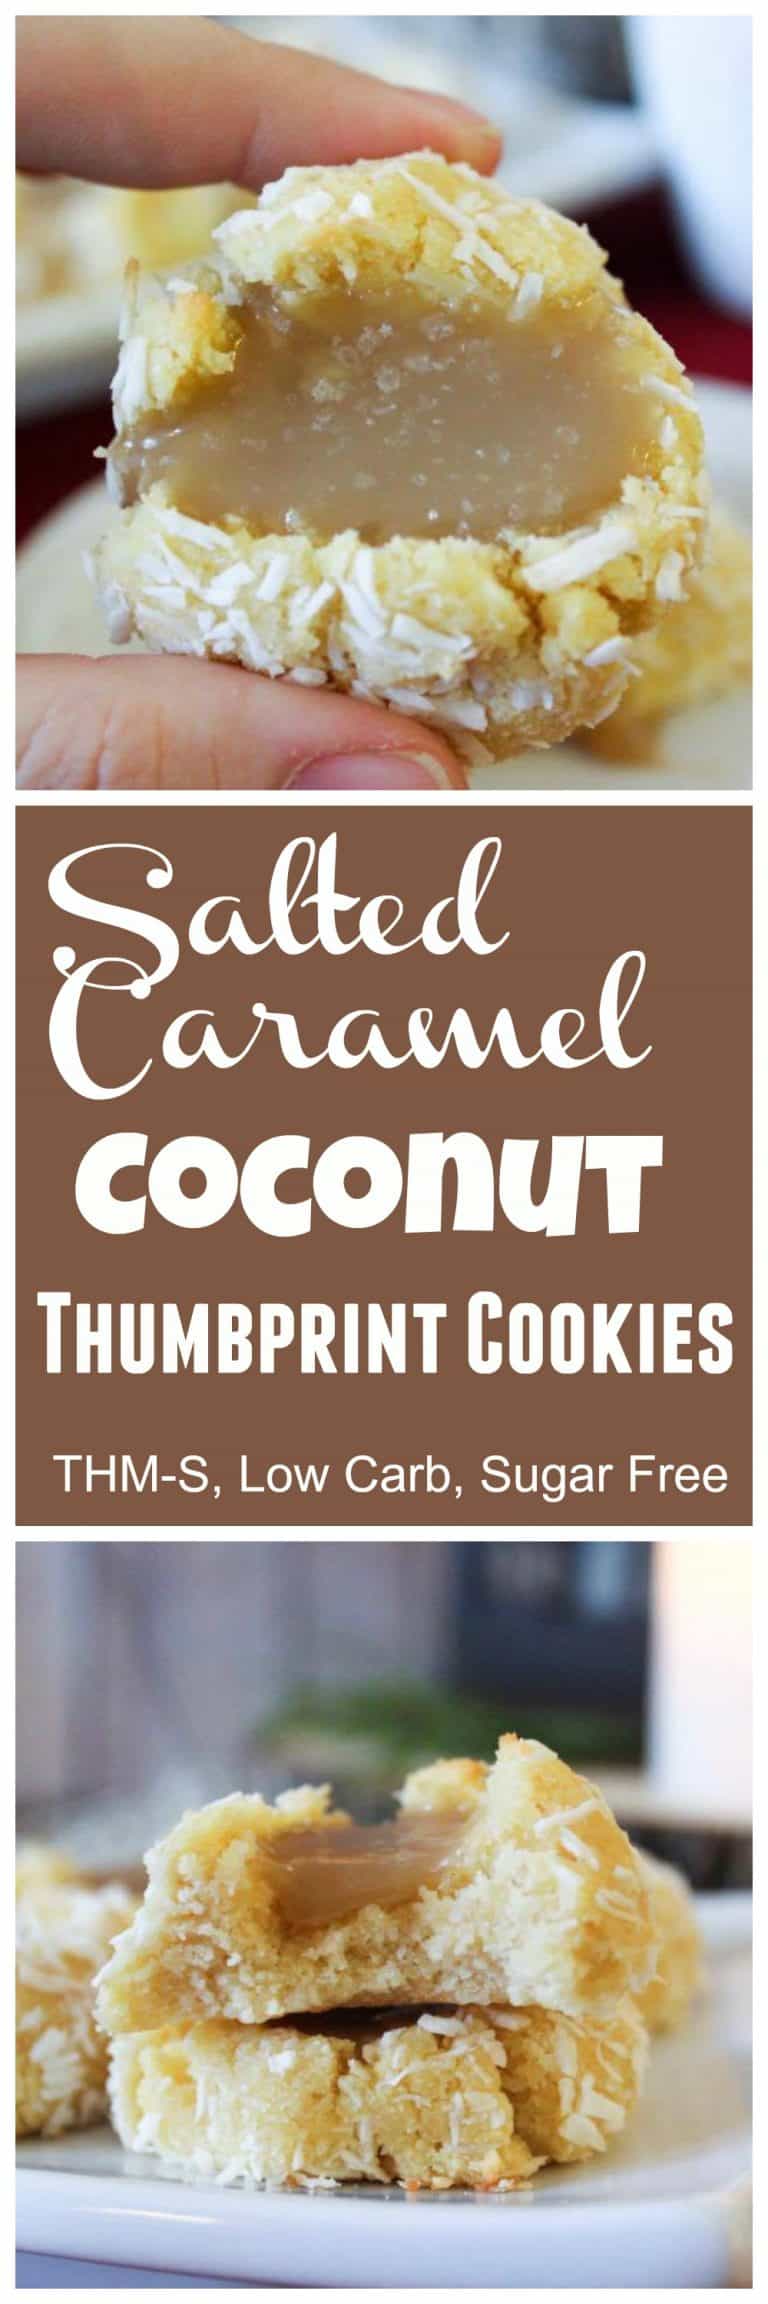 Salted Caramel Coconut Thumbprint Cookies (THM-S, Sugar Free, Low Carb)